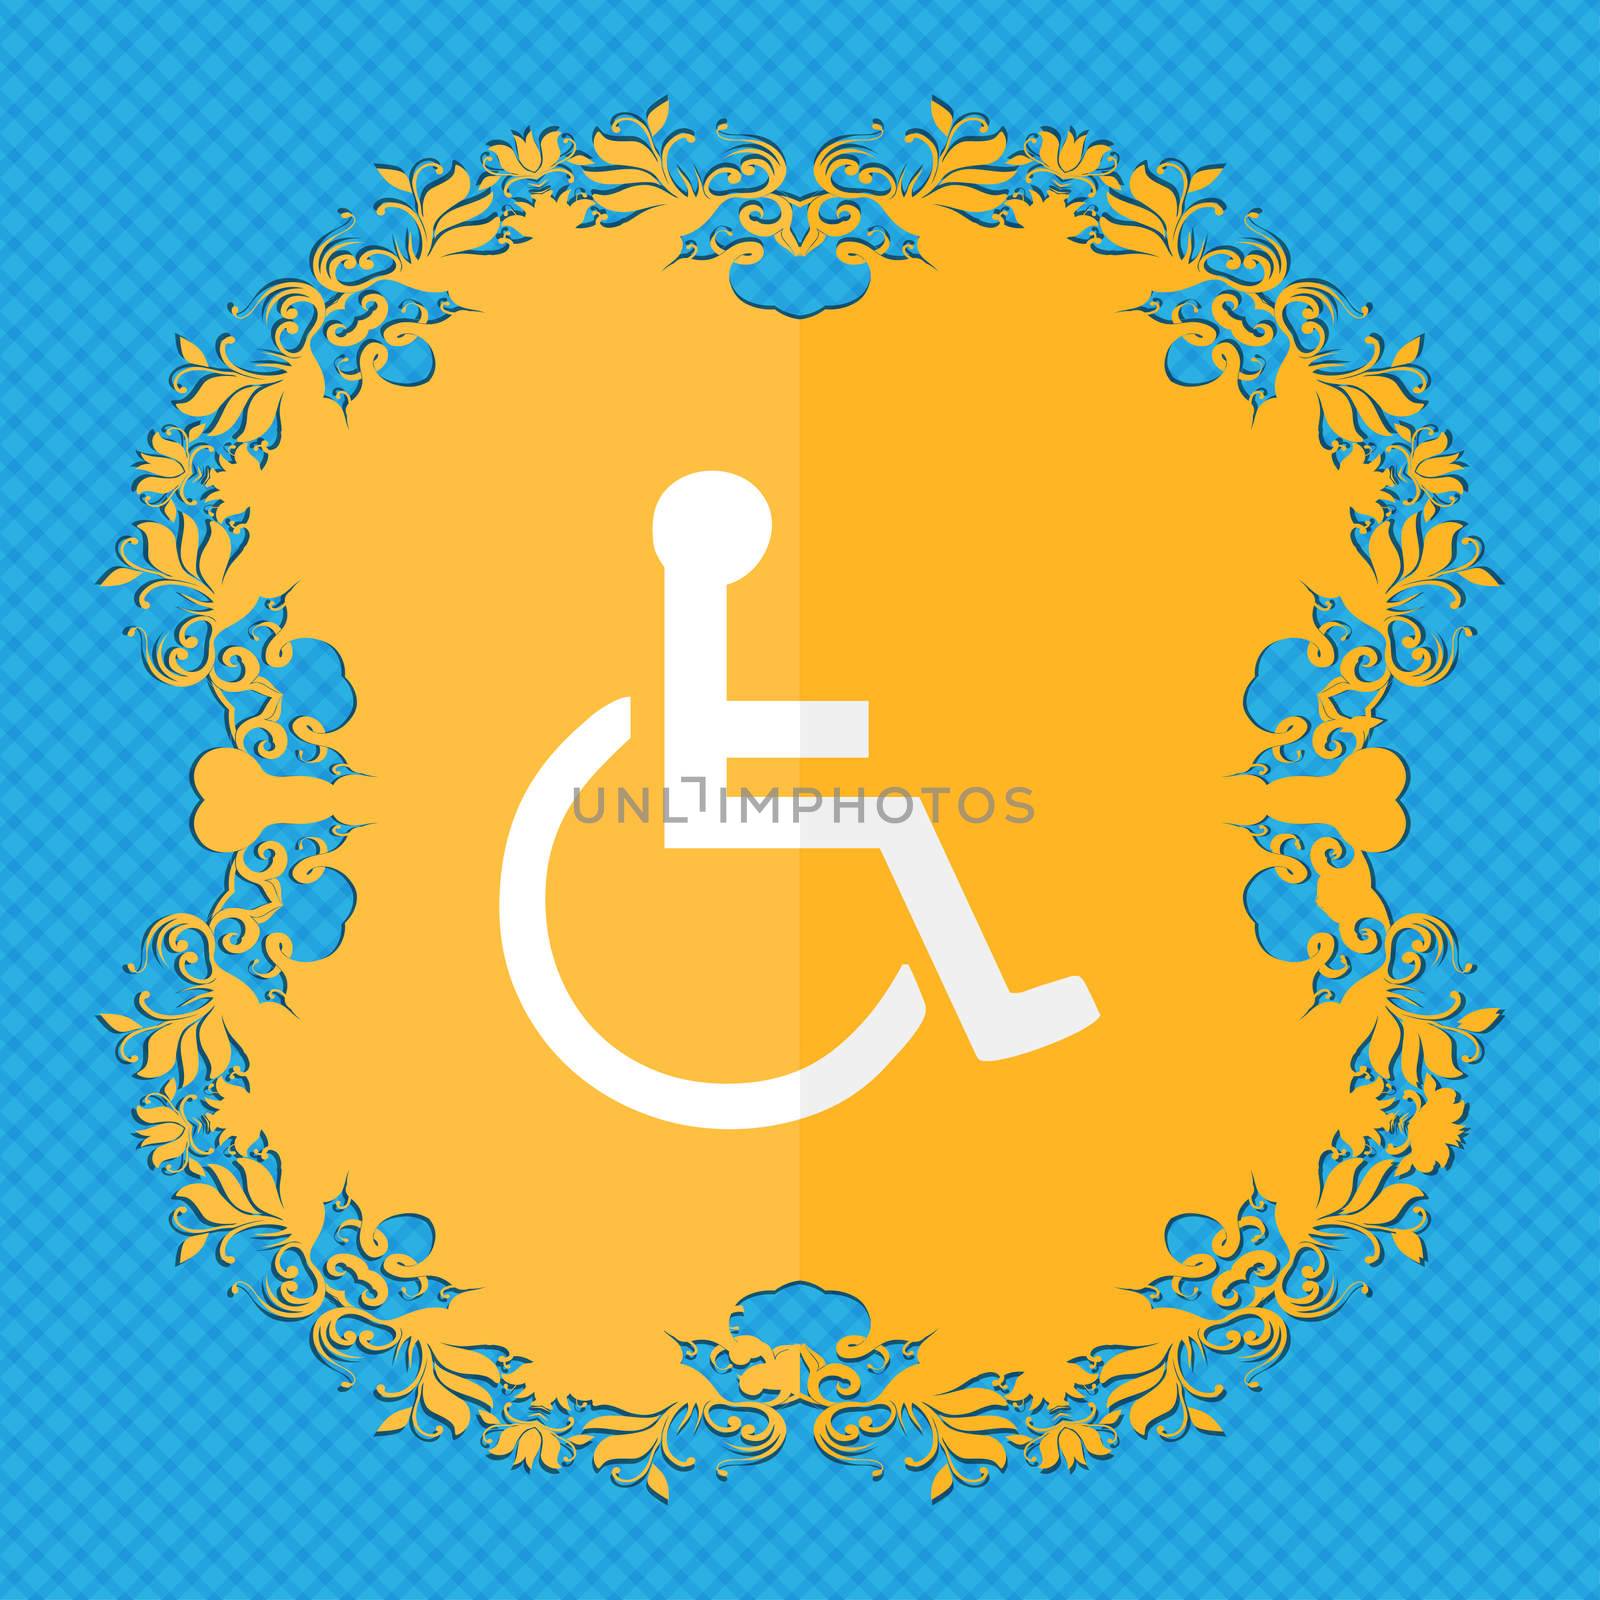 disabled. Floral flat design on a blue abstract background with place for your text. illustration